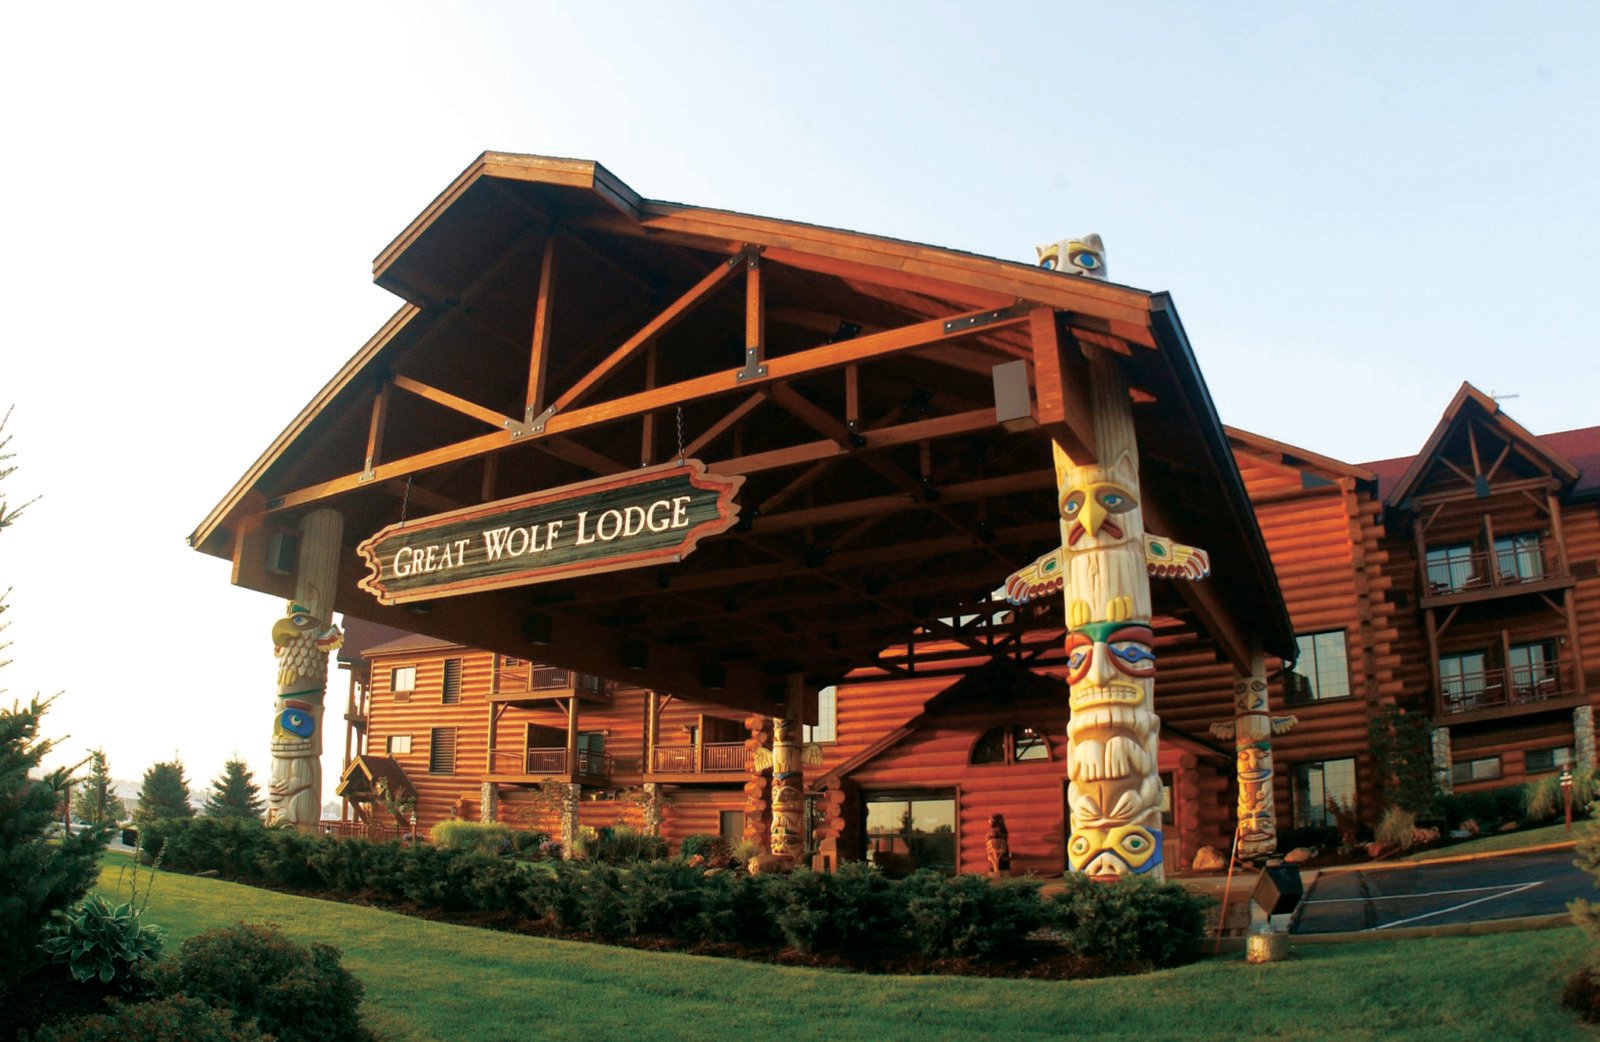 At Great Wolf Lodge